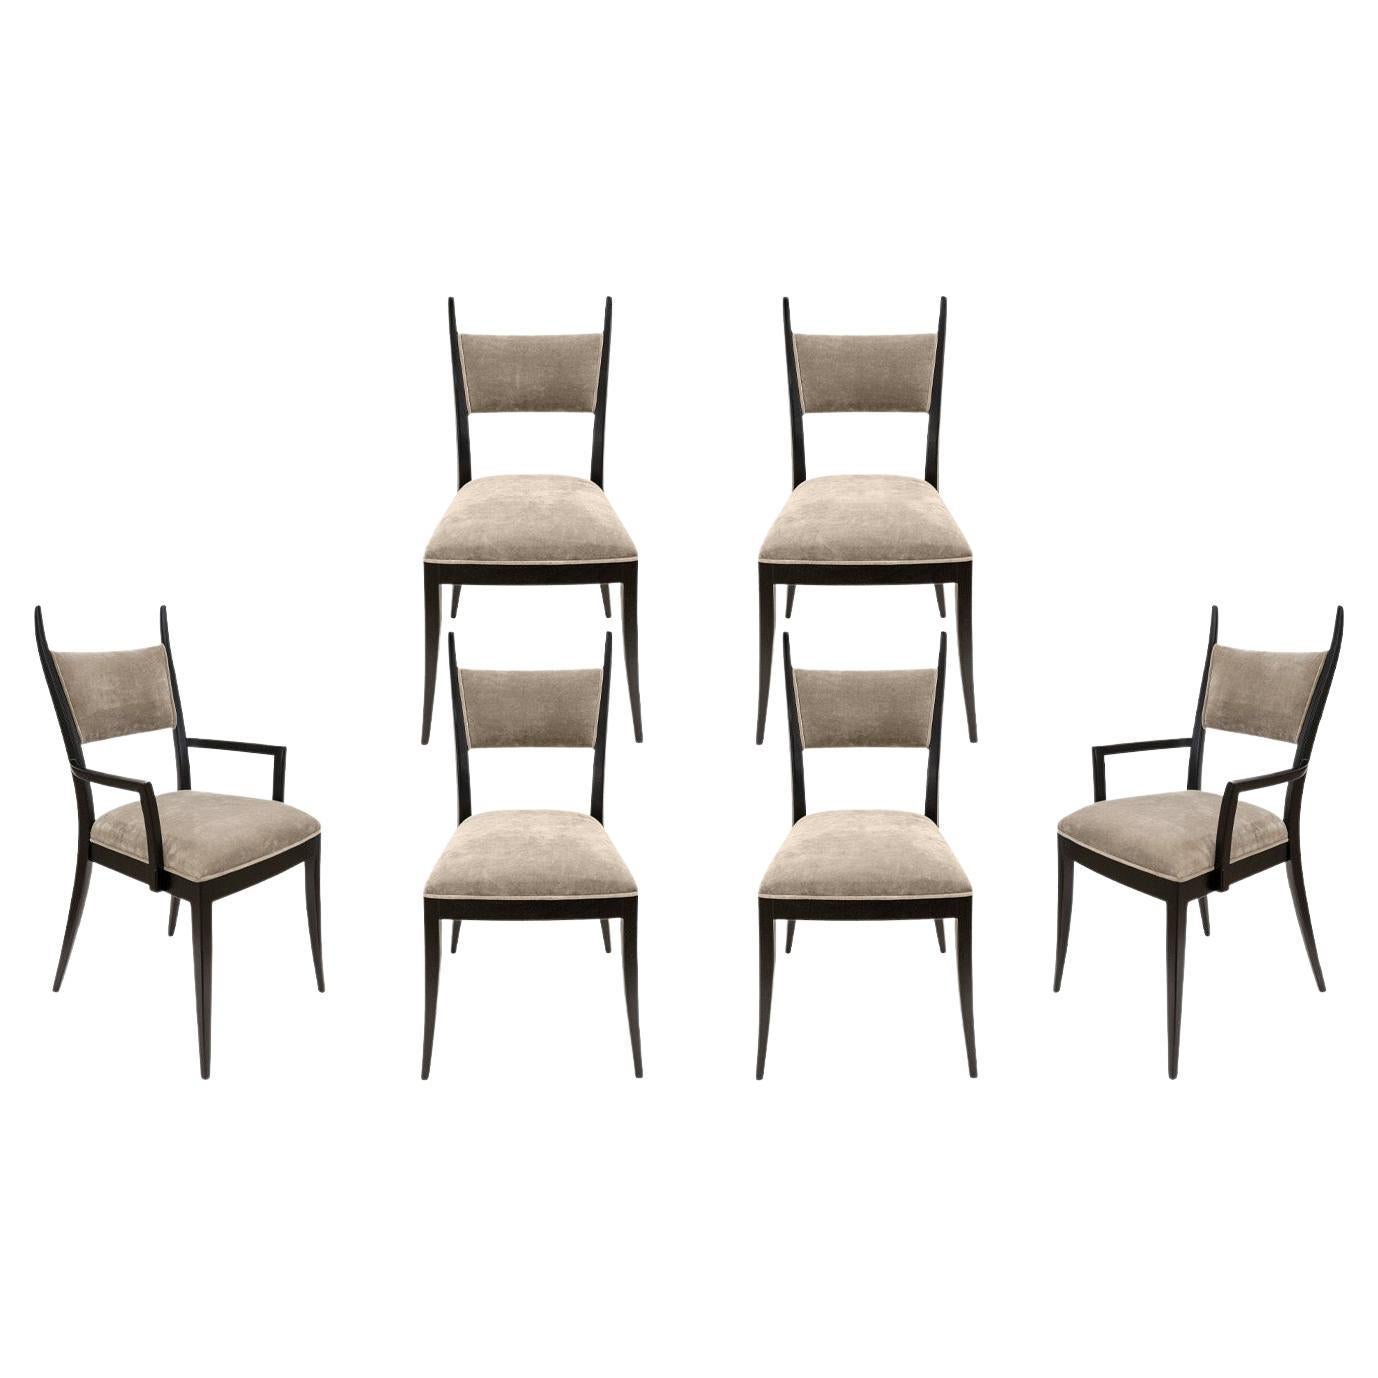 Harvey Probber Sculptural Set of 6 Mahogany Dining Chairs 1950s